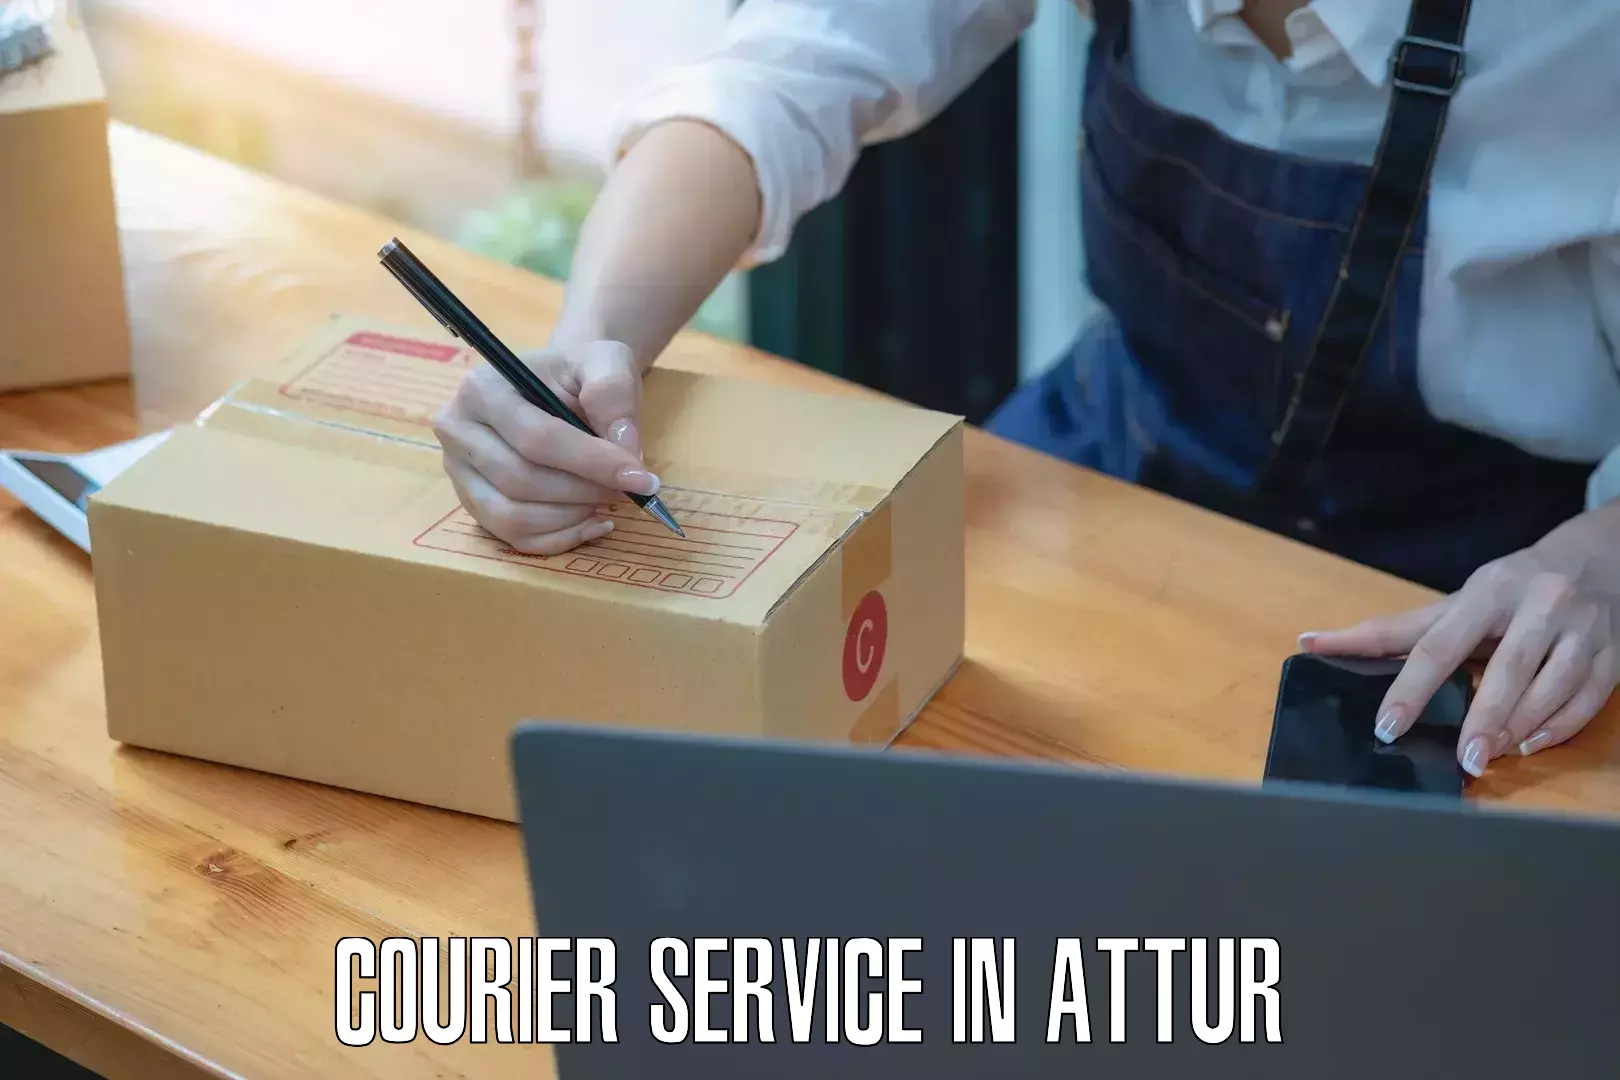 Courier service innovation in Attur